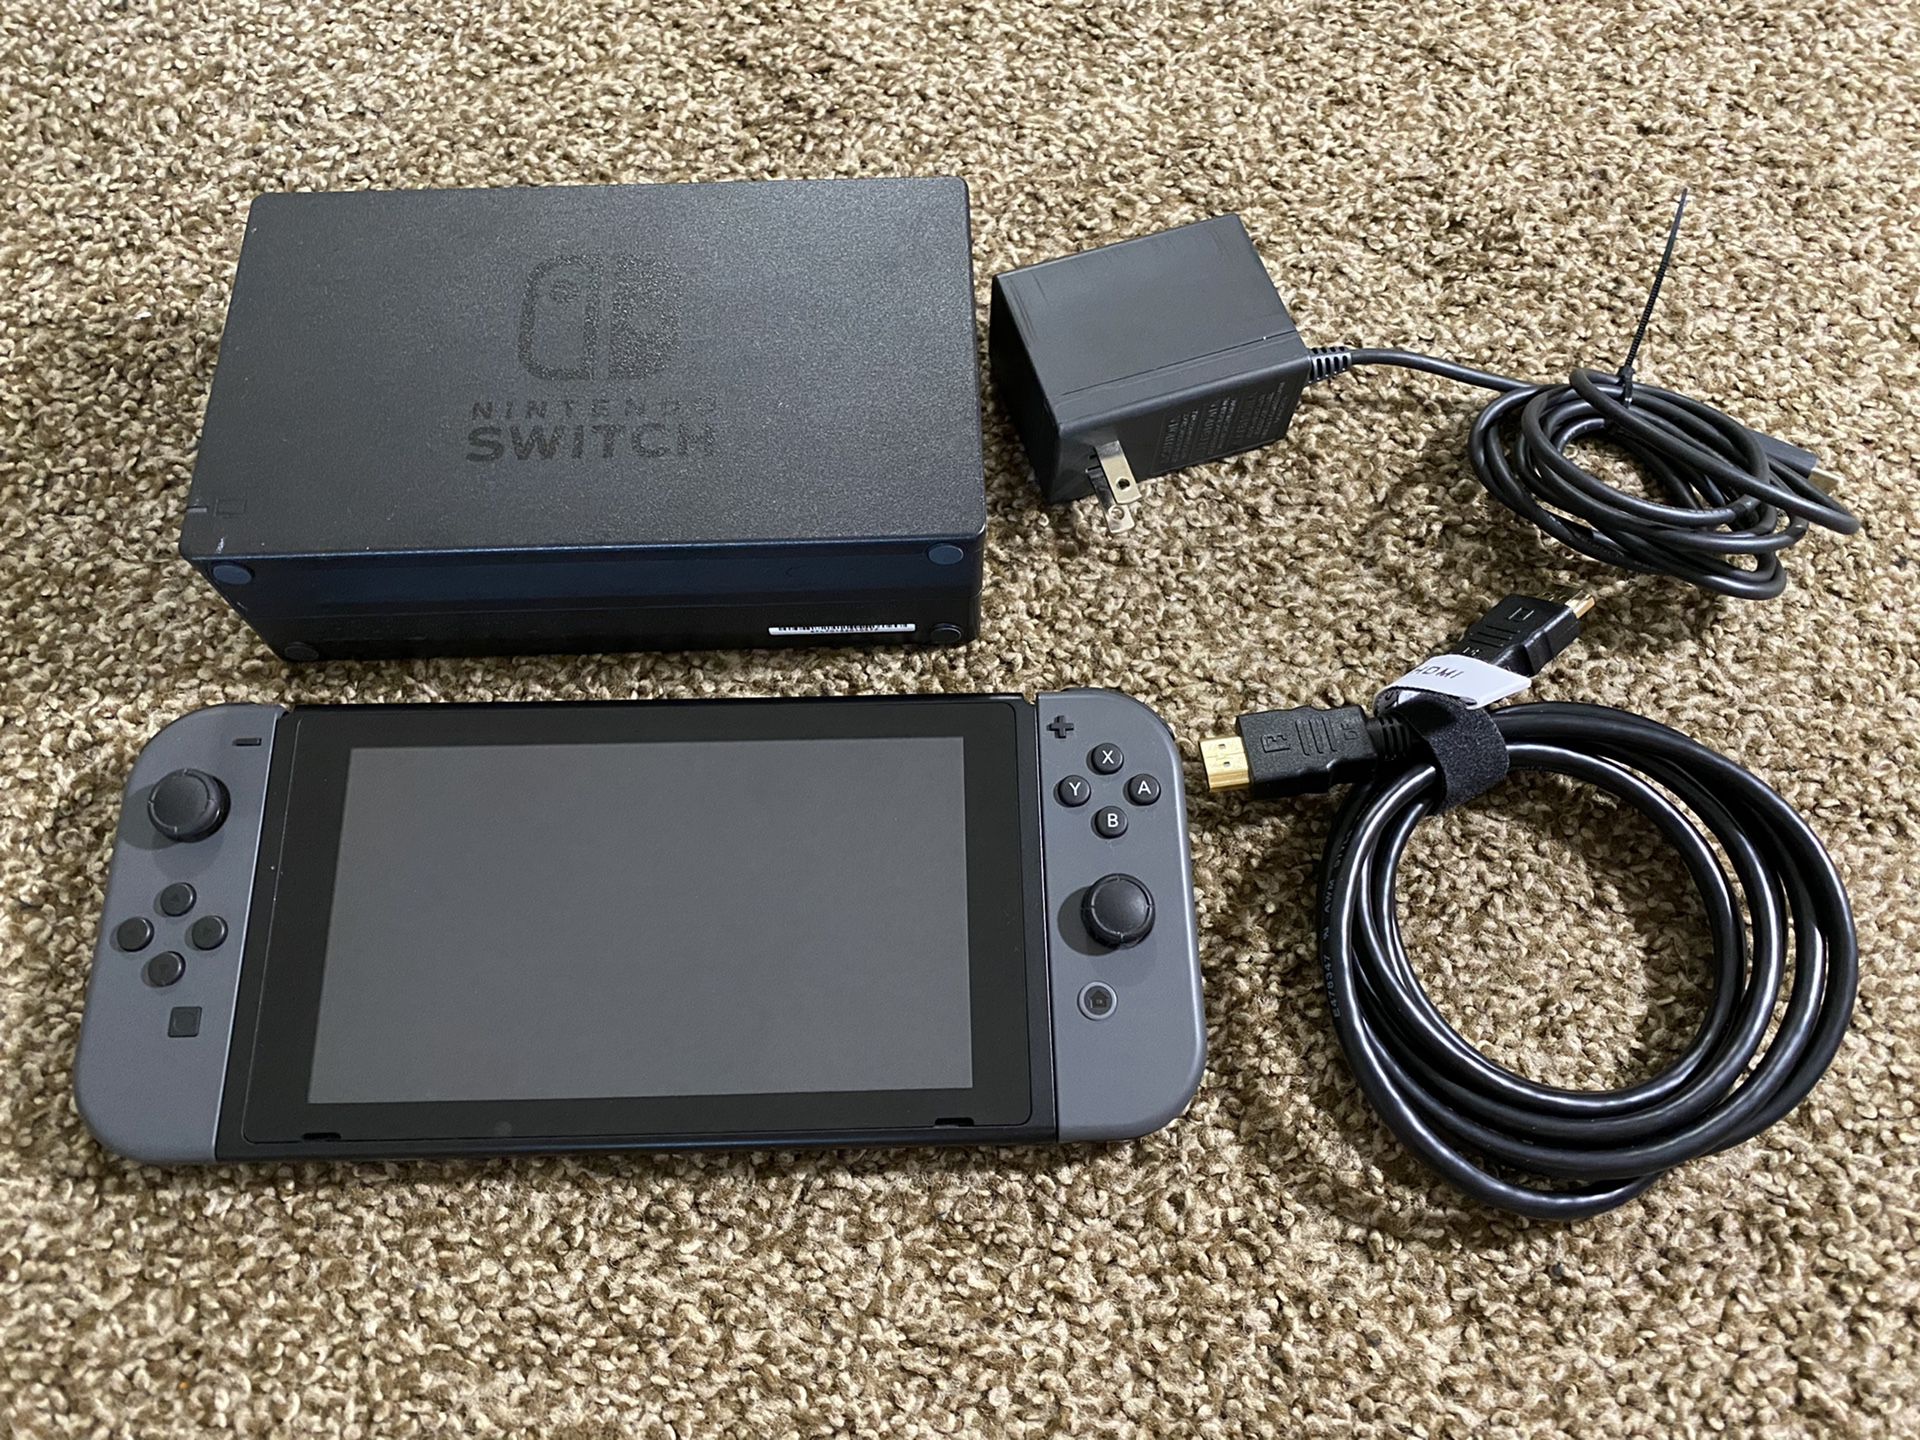 Nintendo Switch with Dock Charger Hdmi Cable